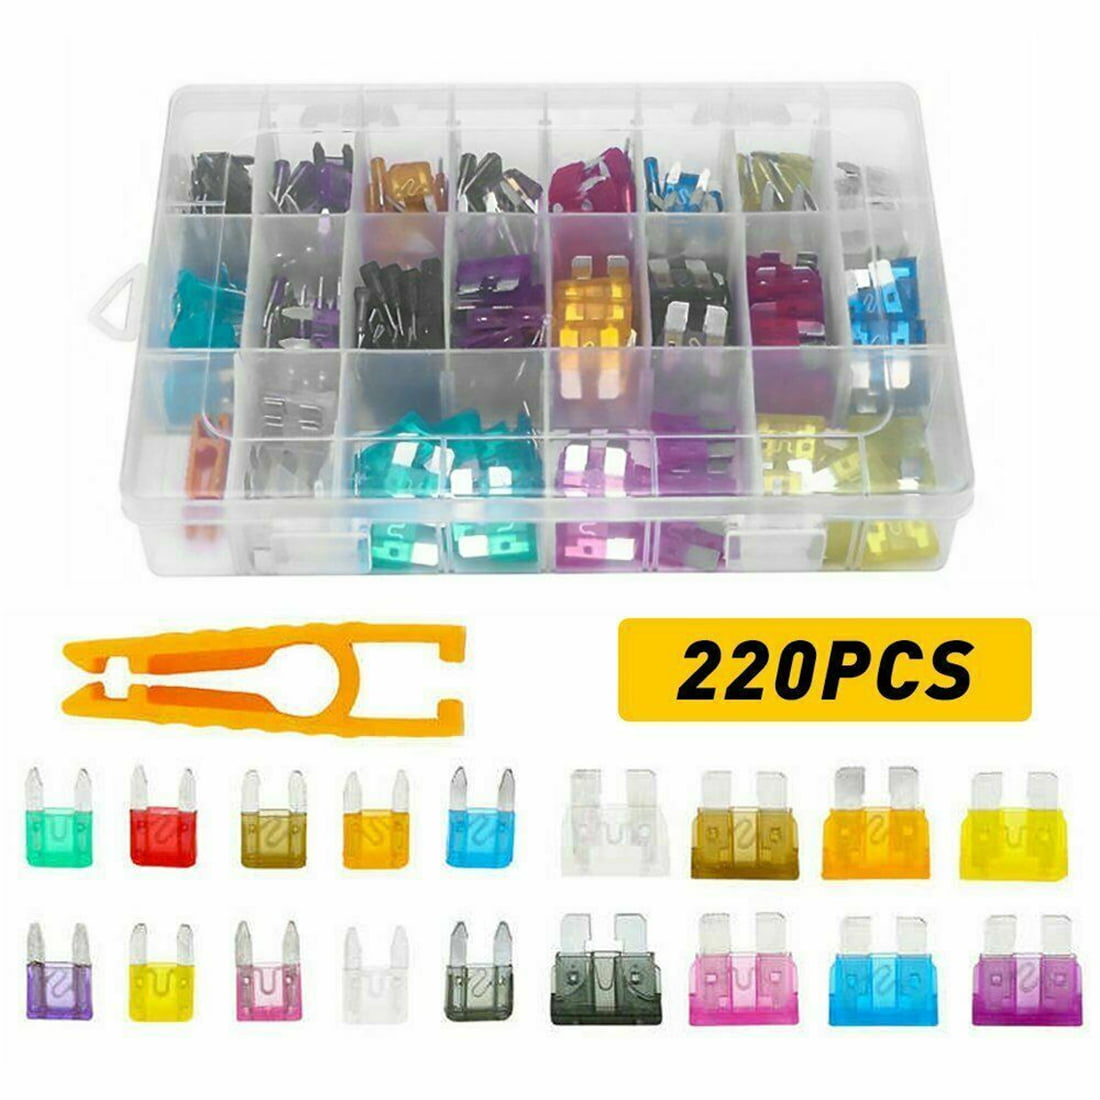 25 Pack 20 Amp ATC ATO Blade Fuse Kit Auto Car Boat Marine Truck Motorcycle 20A 